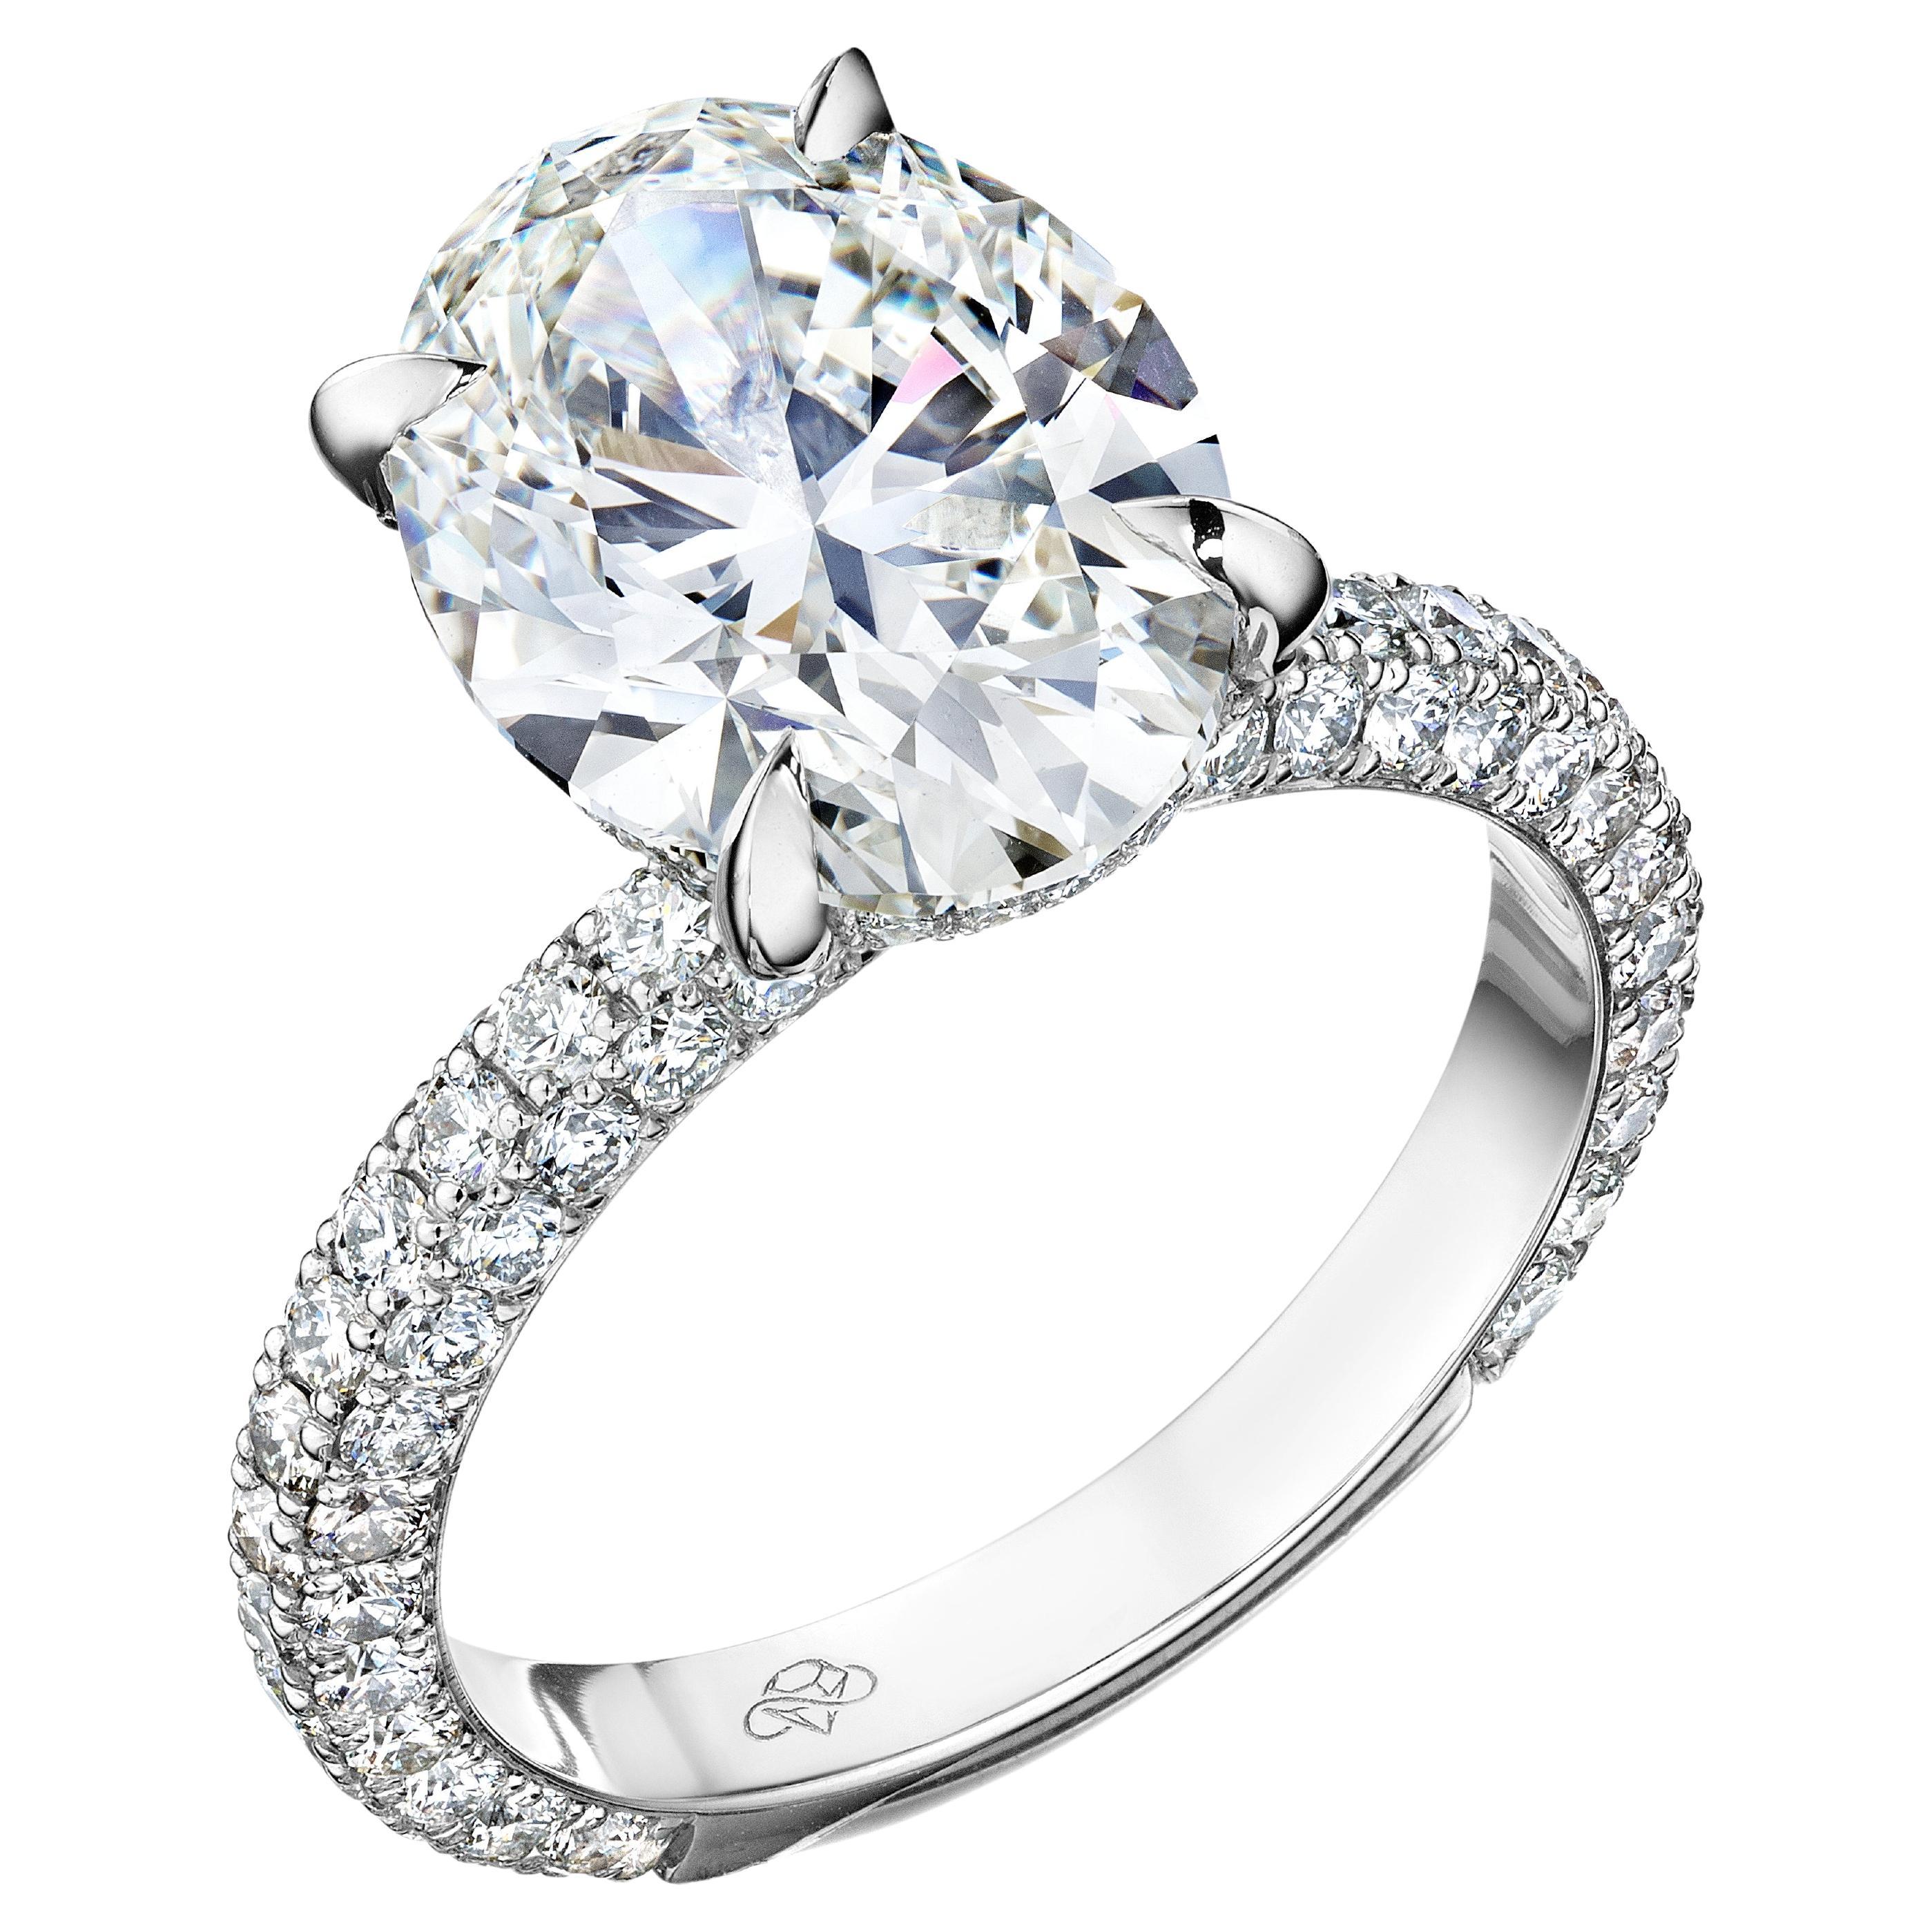 GIA Certified 4.00 Carat D SI1 Oval Diamond Engagement Ring "Catherine" For Sale